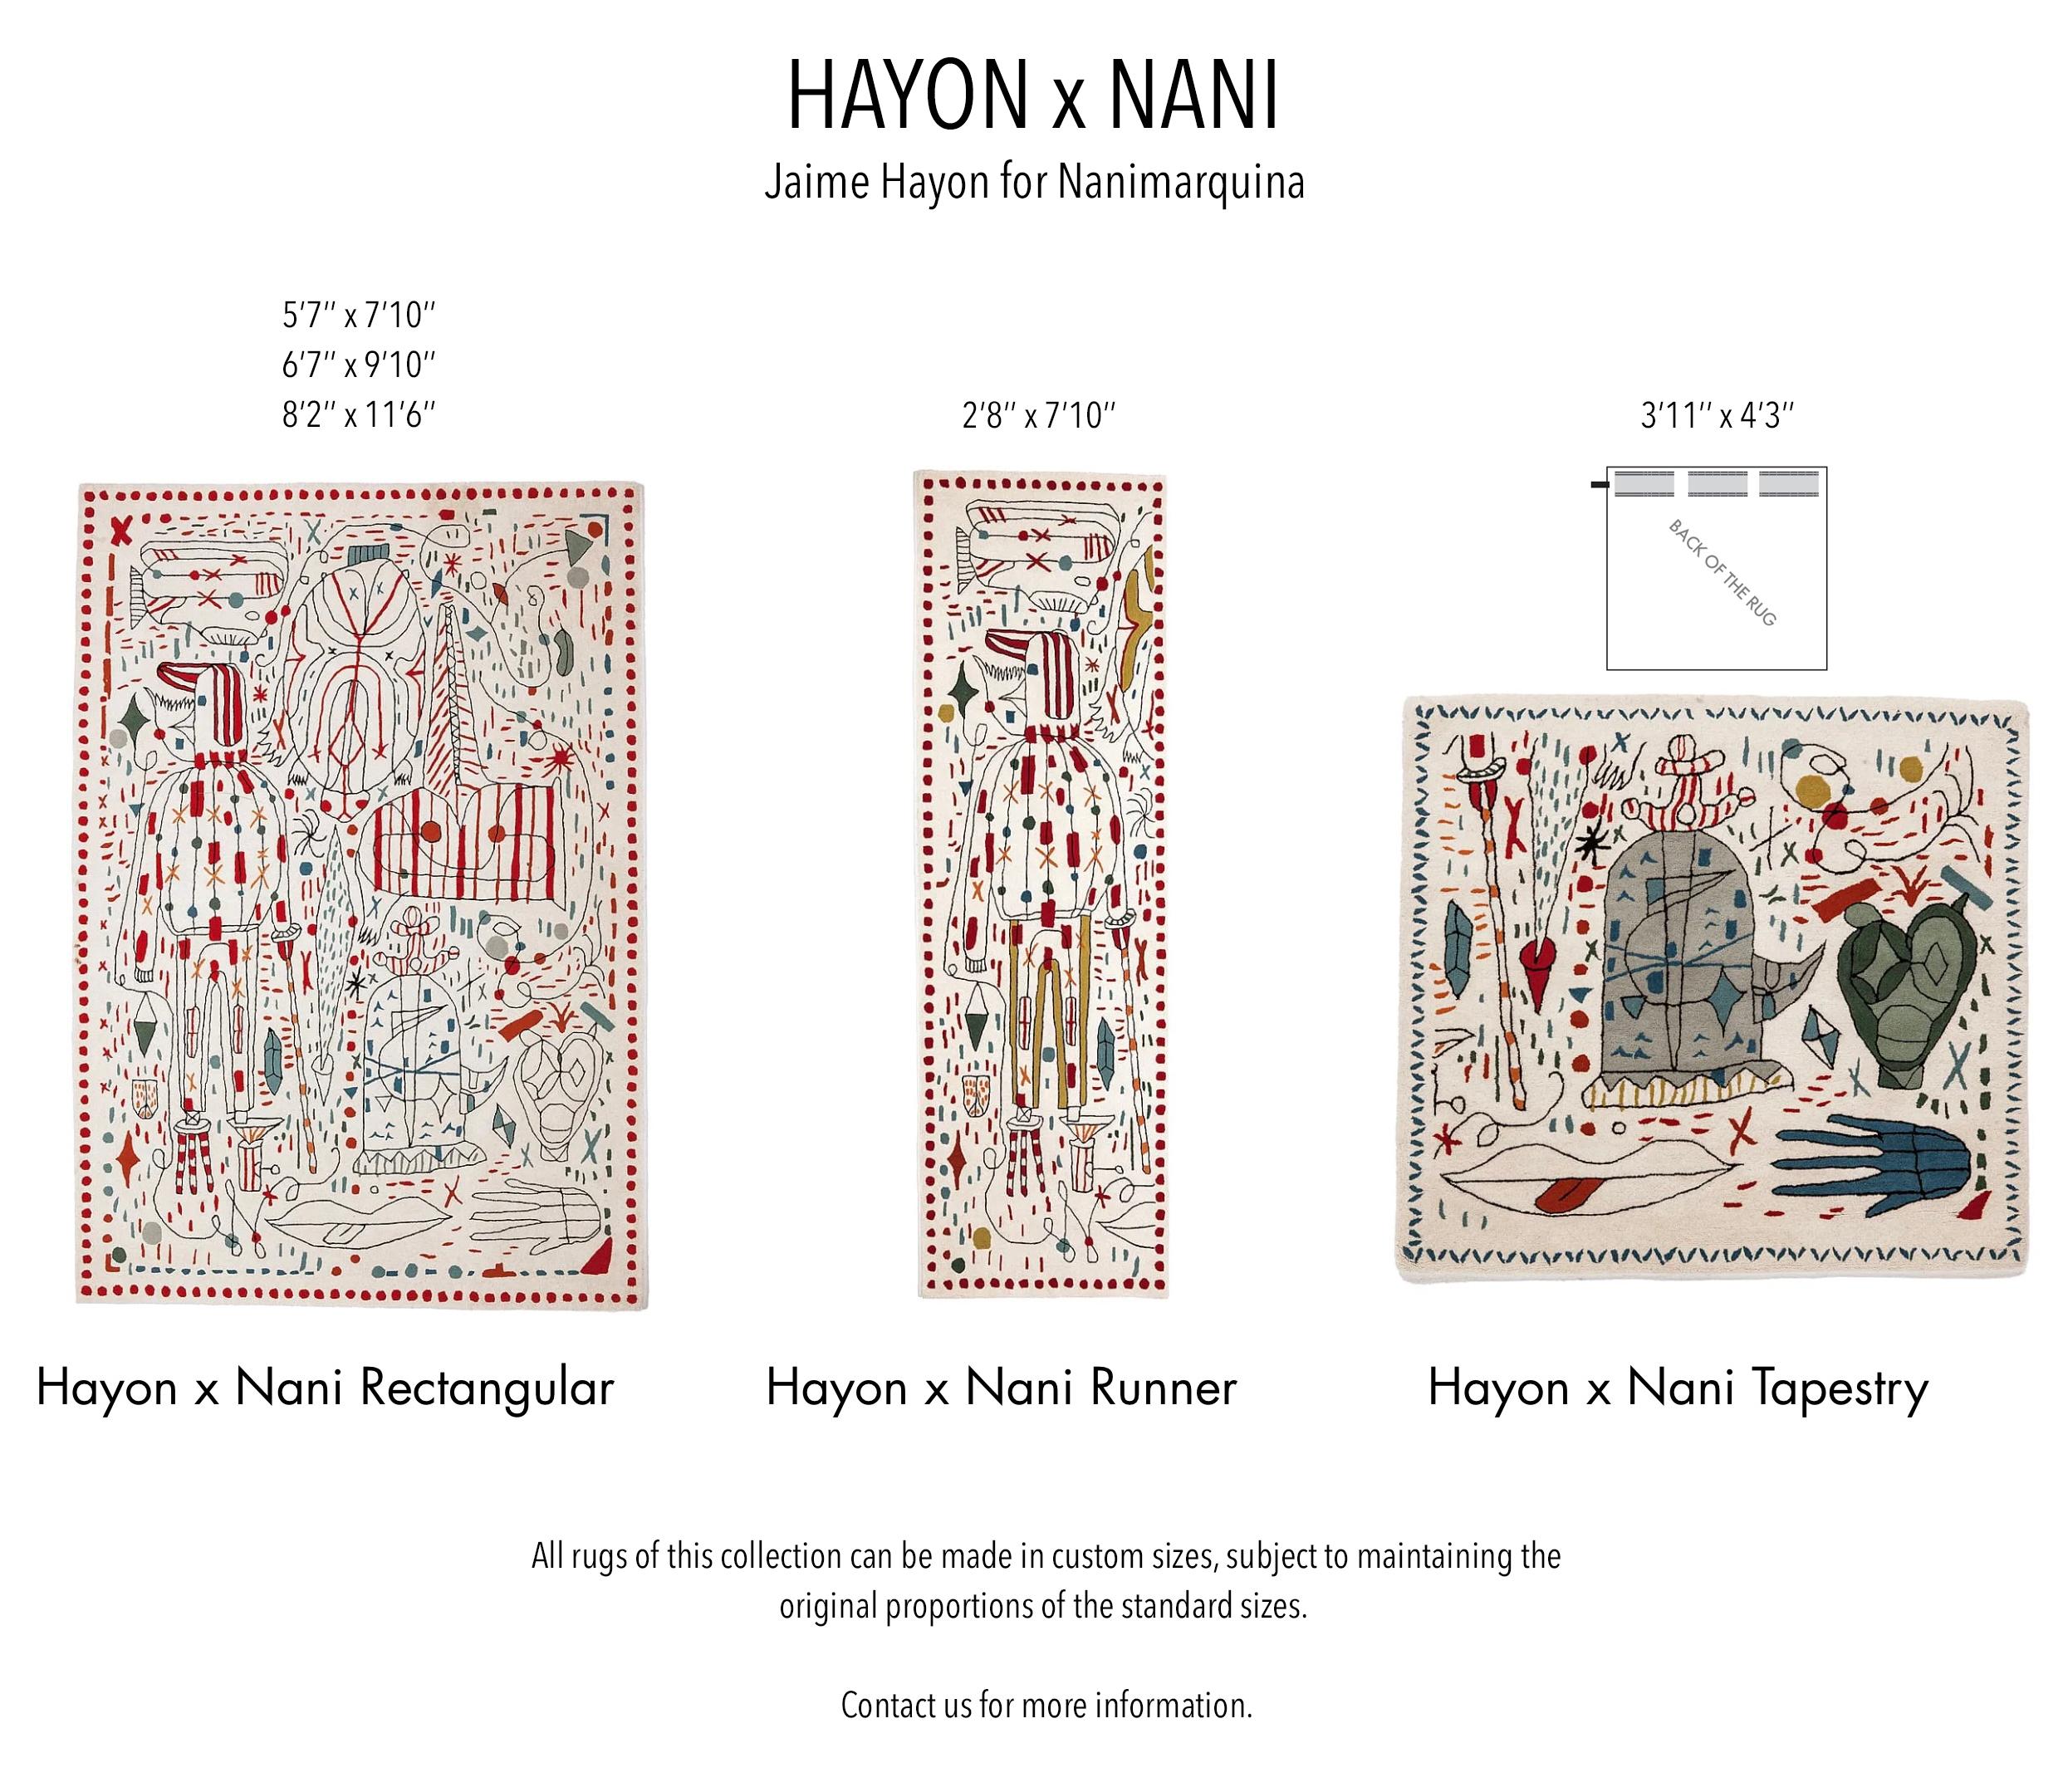 Wool 'Hayon x Nani' Hand-Tufted Runner by Jaime Hayon for Nanimarquina For Sale